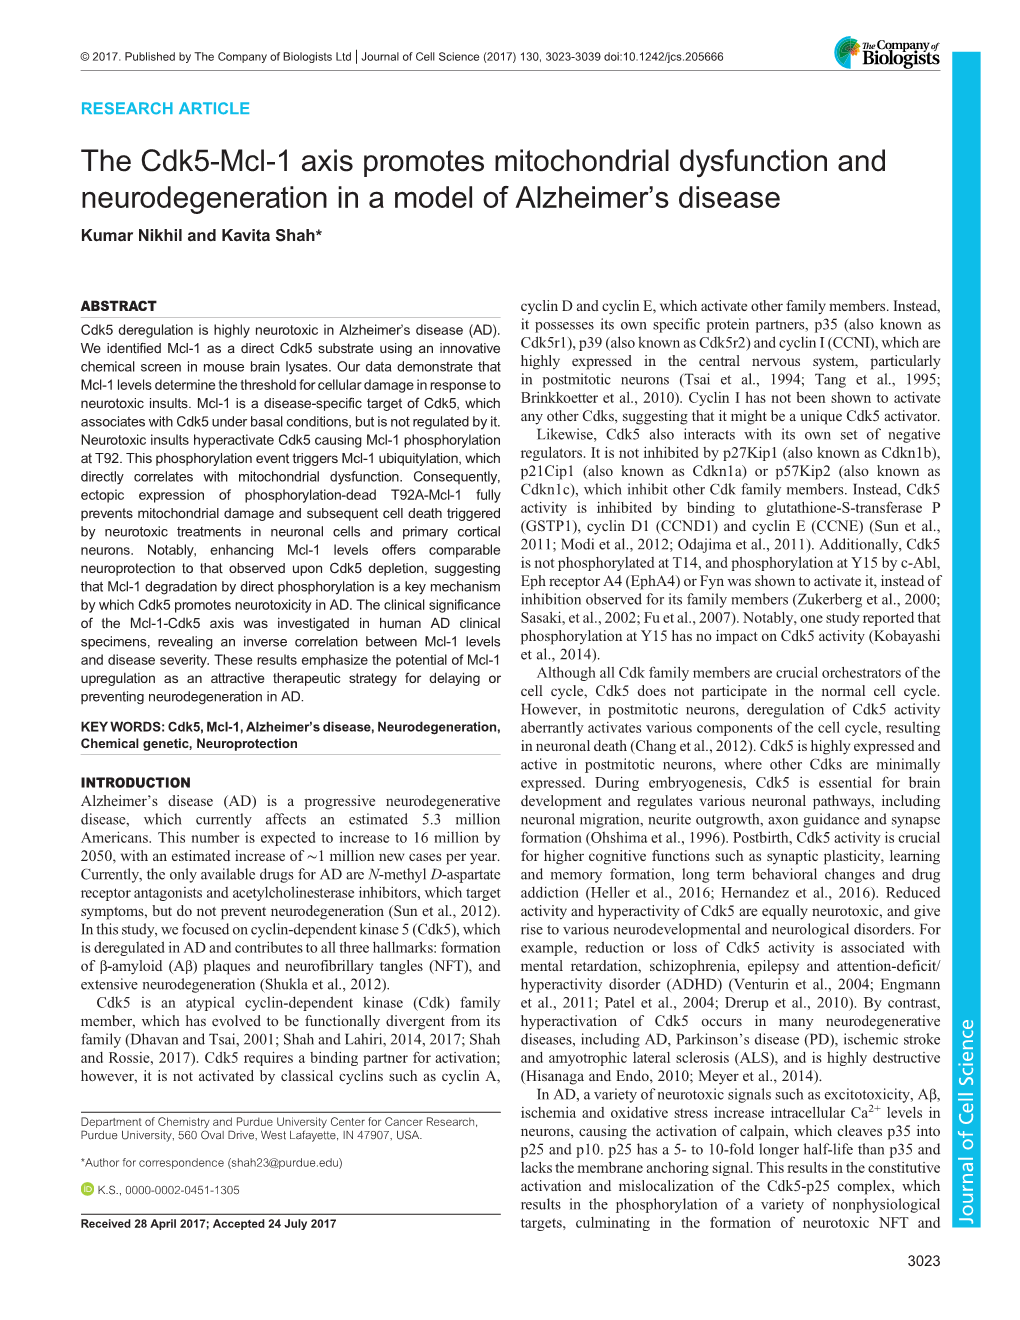 The Cdk5-Mcl-1 Axis Promotes Mitochondrial Dysfunction and Neurodegeneration in a Model of Alzheimer’S Disease Kumar Nikhil and Kavita Shah*